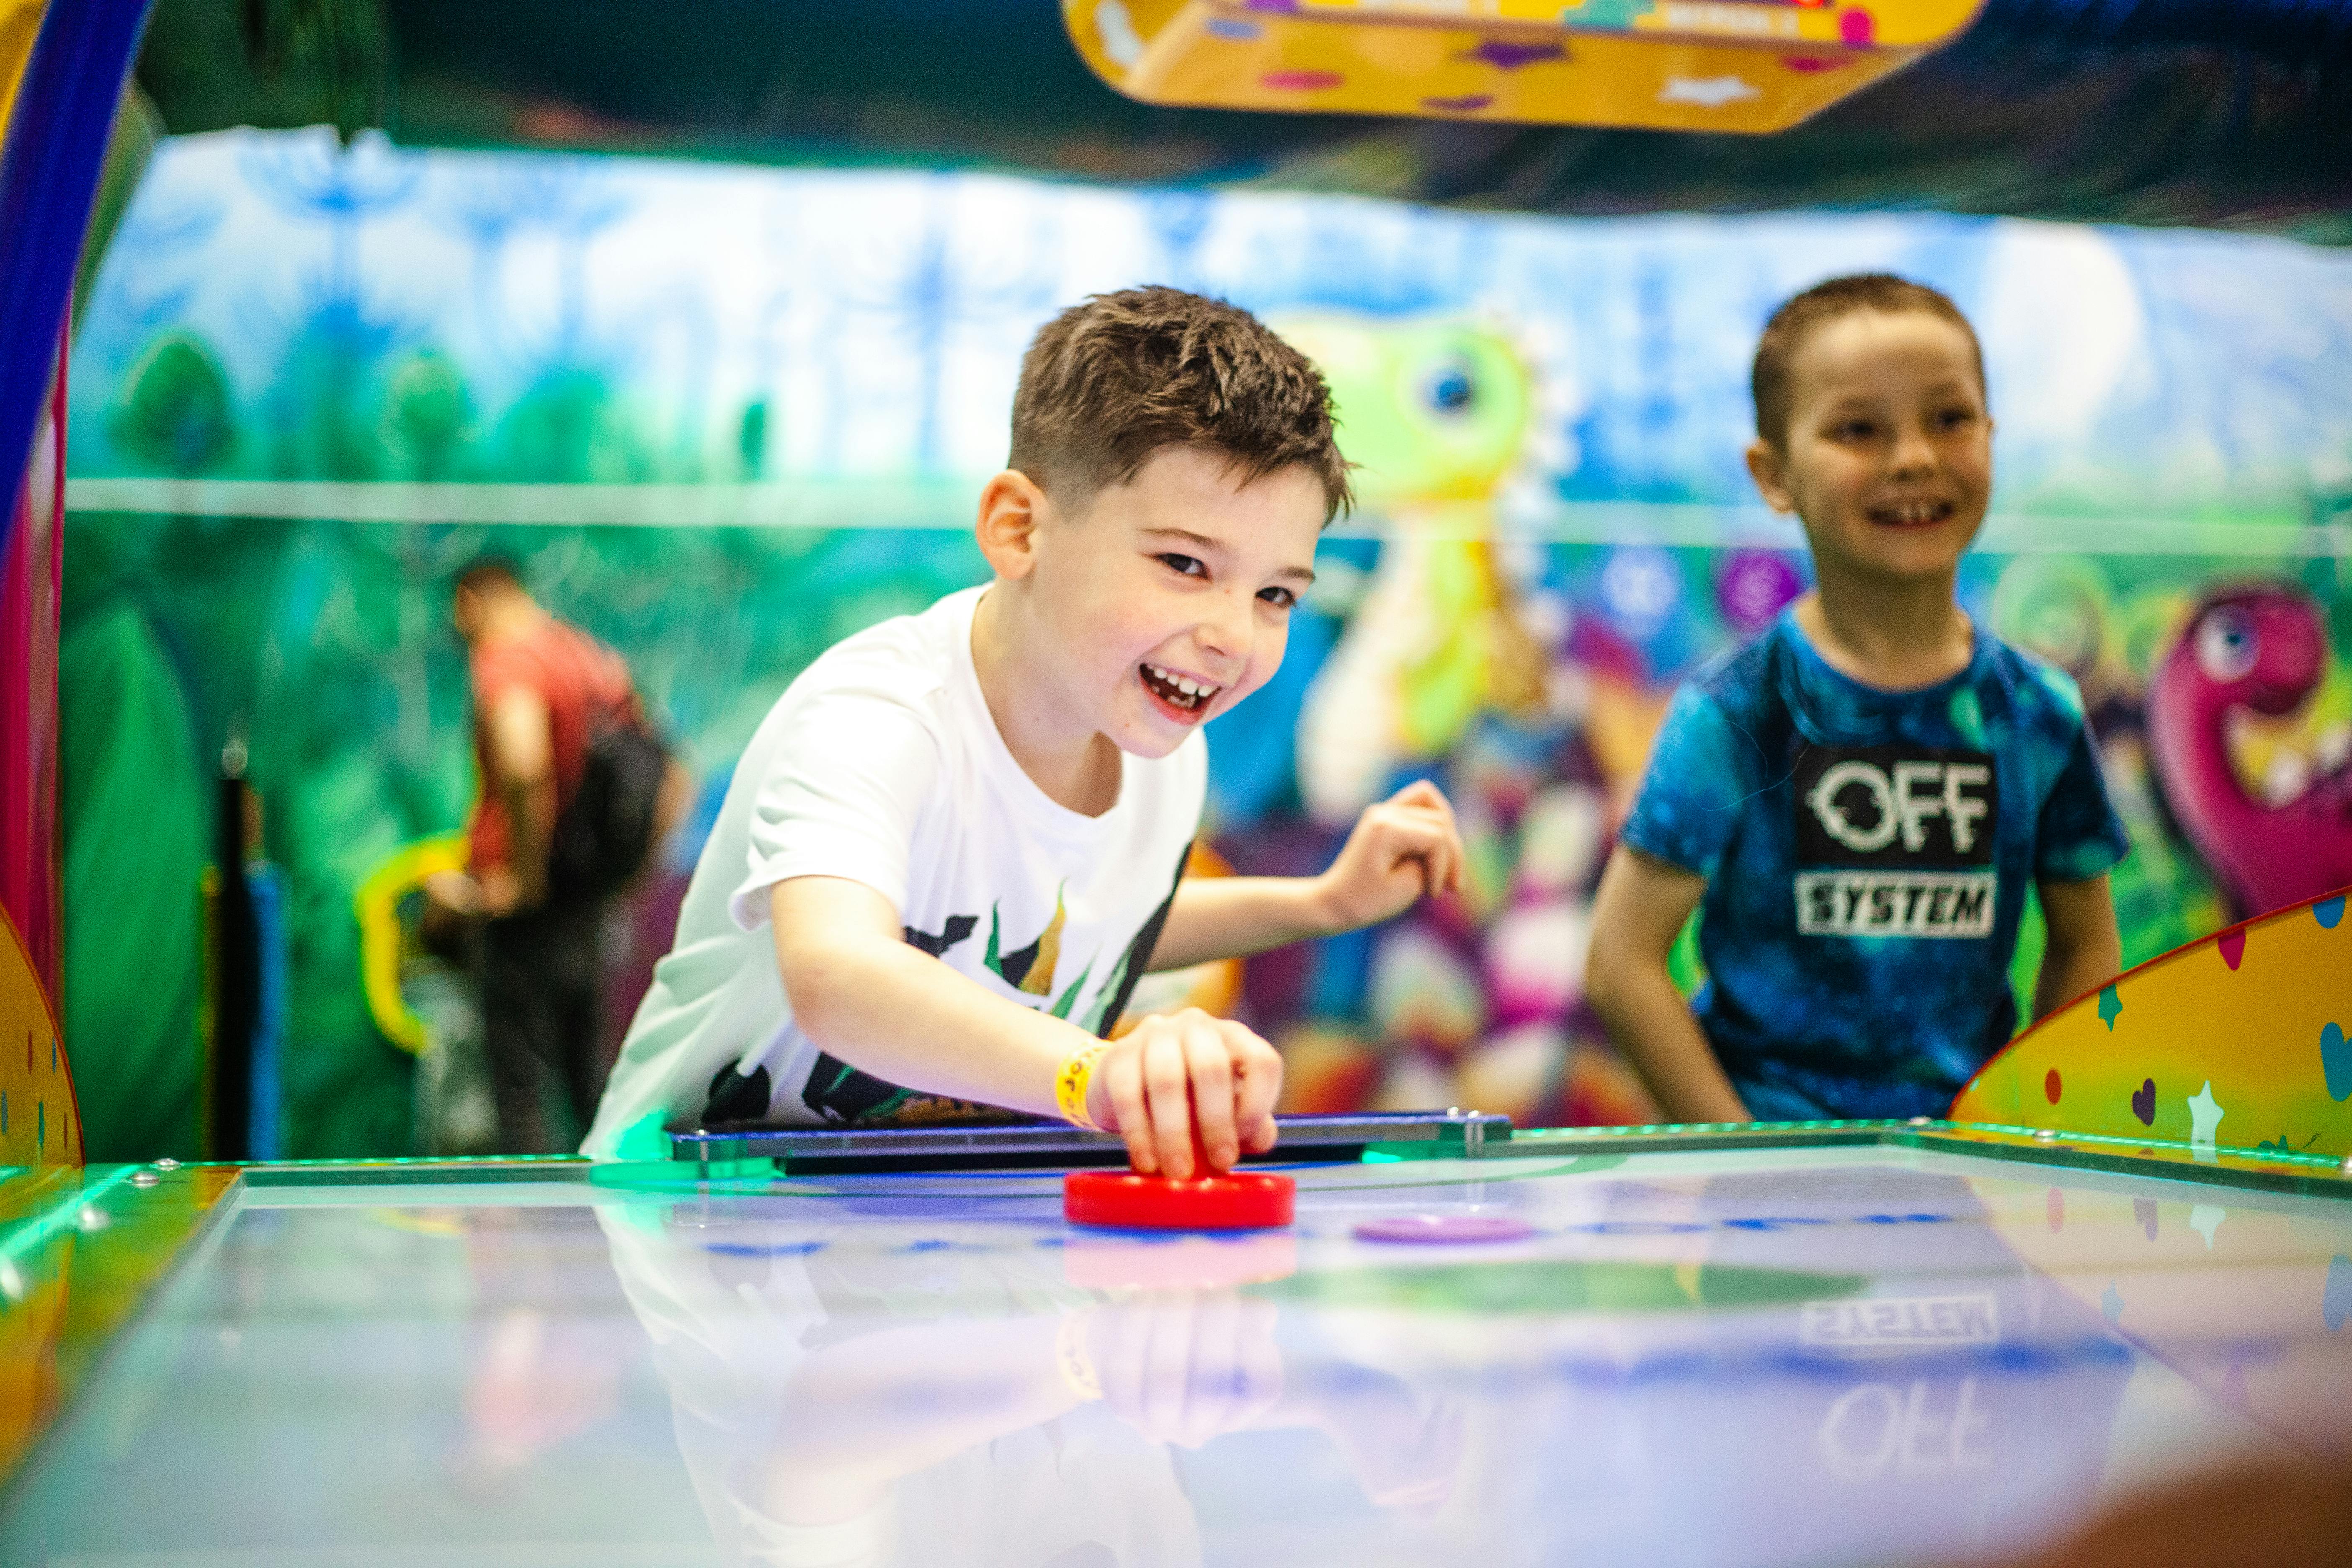 Free Photo of a Kid Playing Air Hockey while Smiling Stock Photo